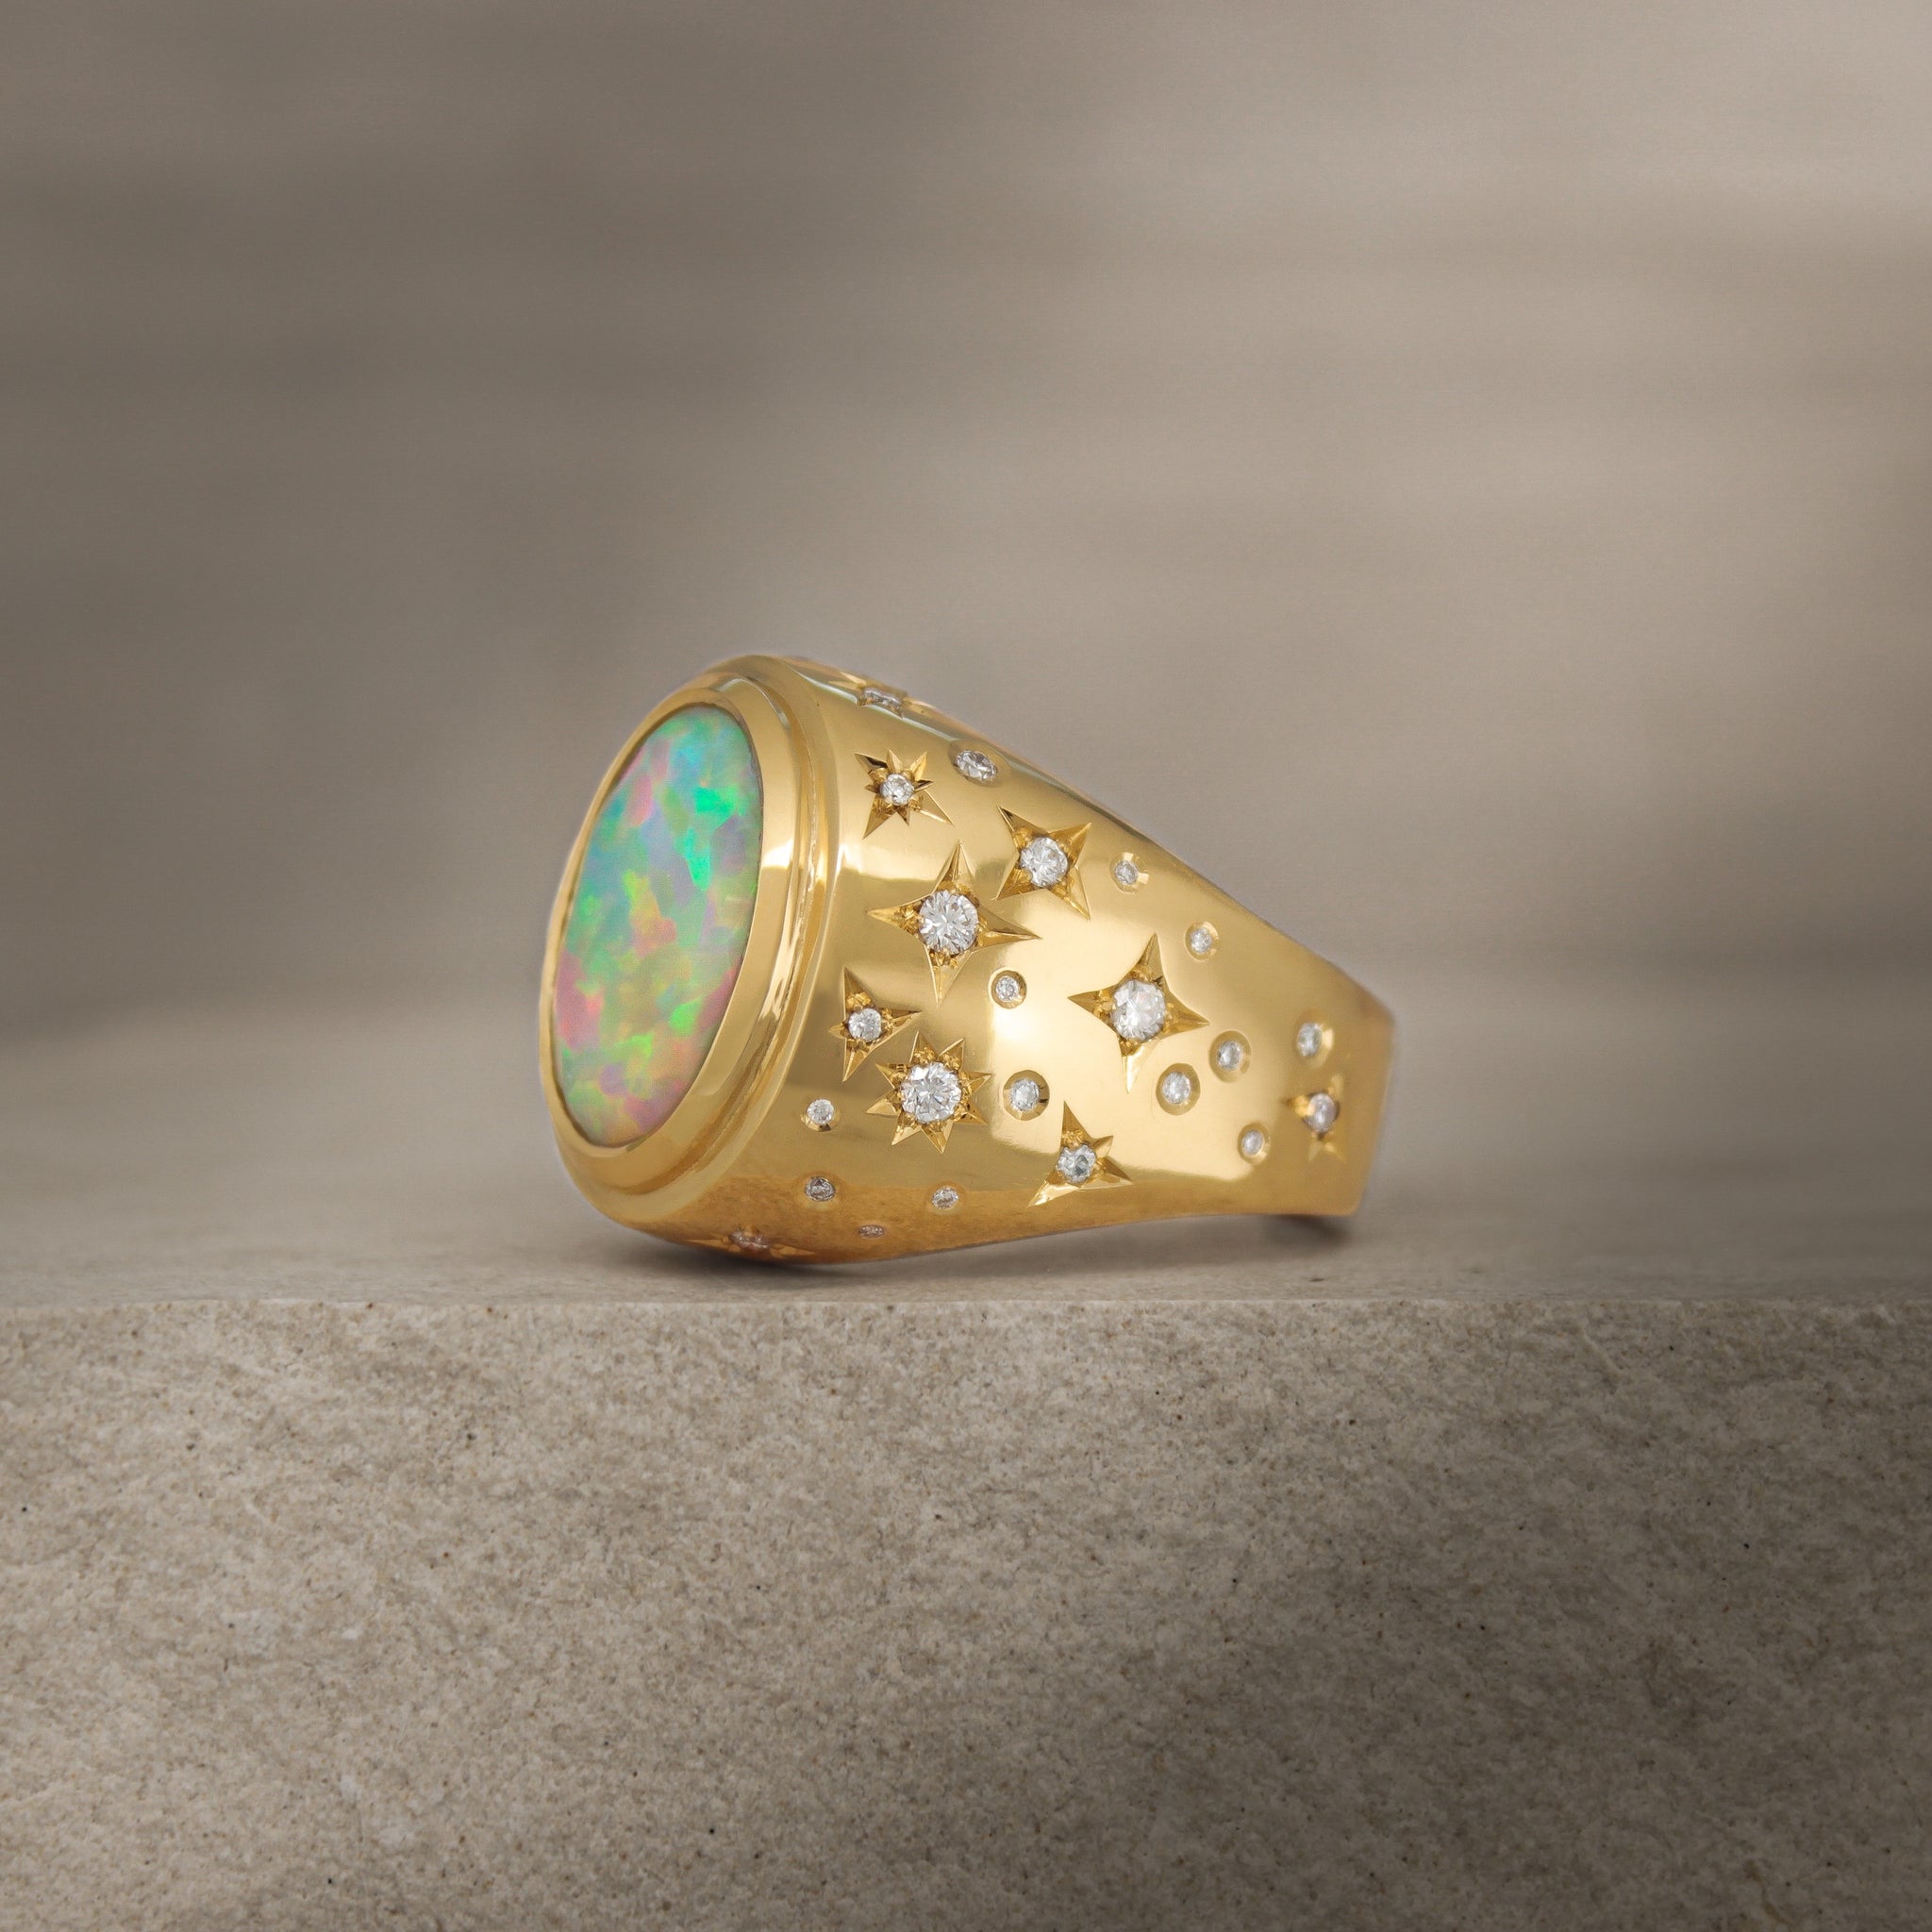 Close-up view of Galaxy III signet ring with 4ct opal and diamond accents on 18k yellow gold band.